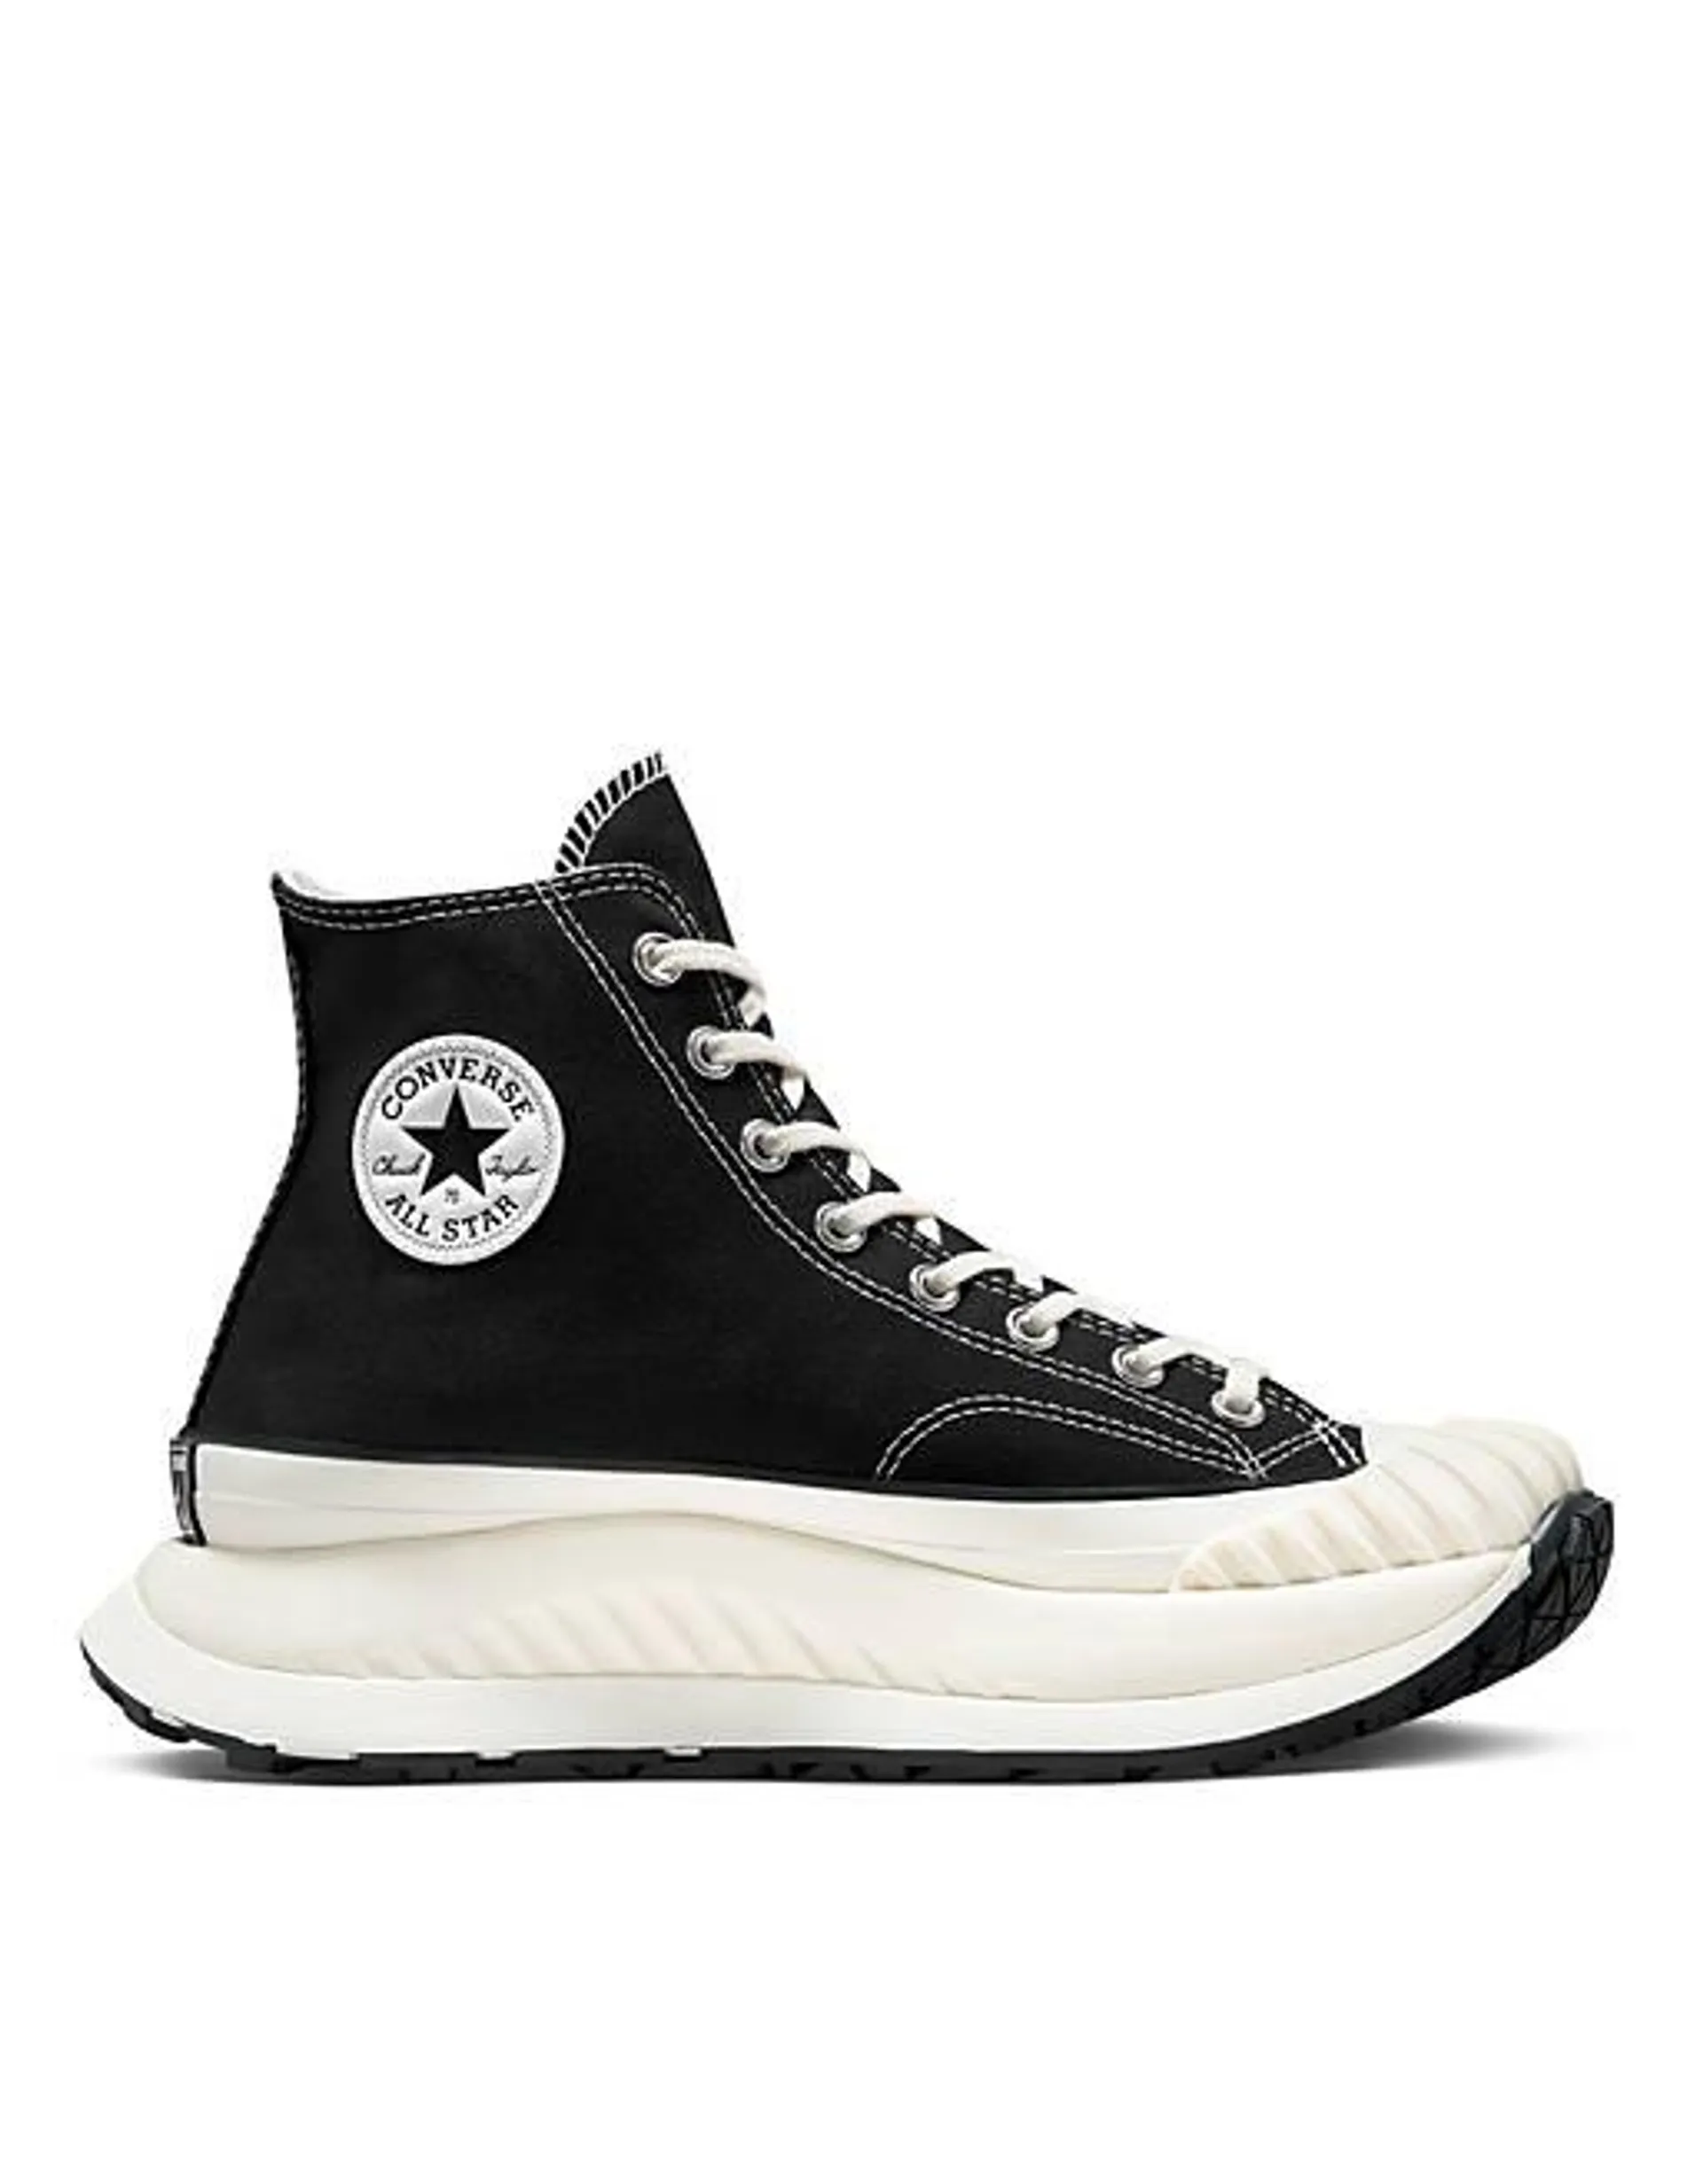 Converse Chuck 70 AT-CX sneakers in black